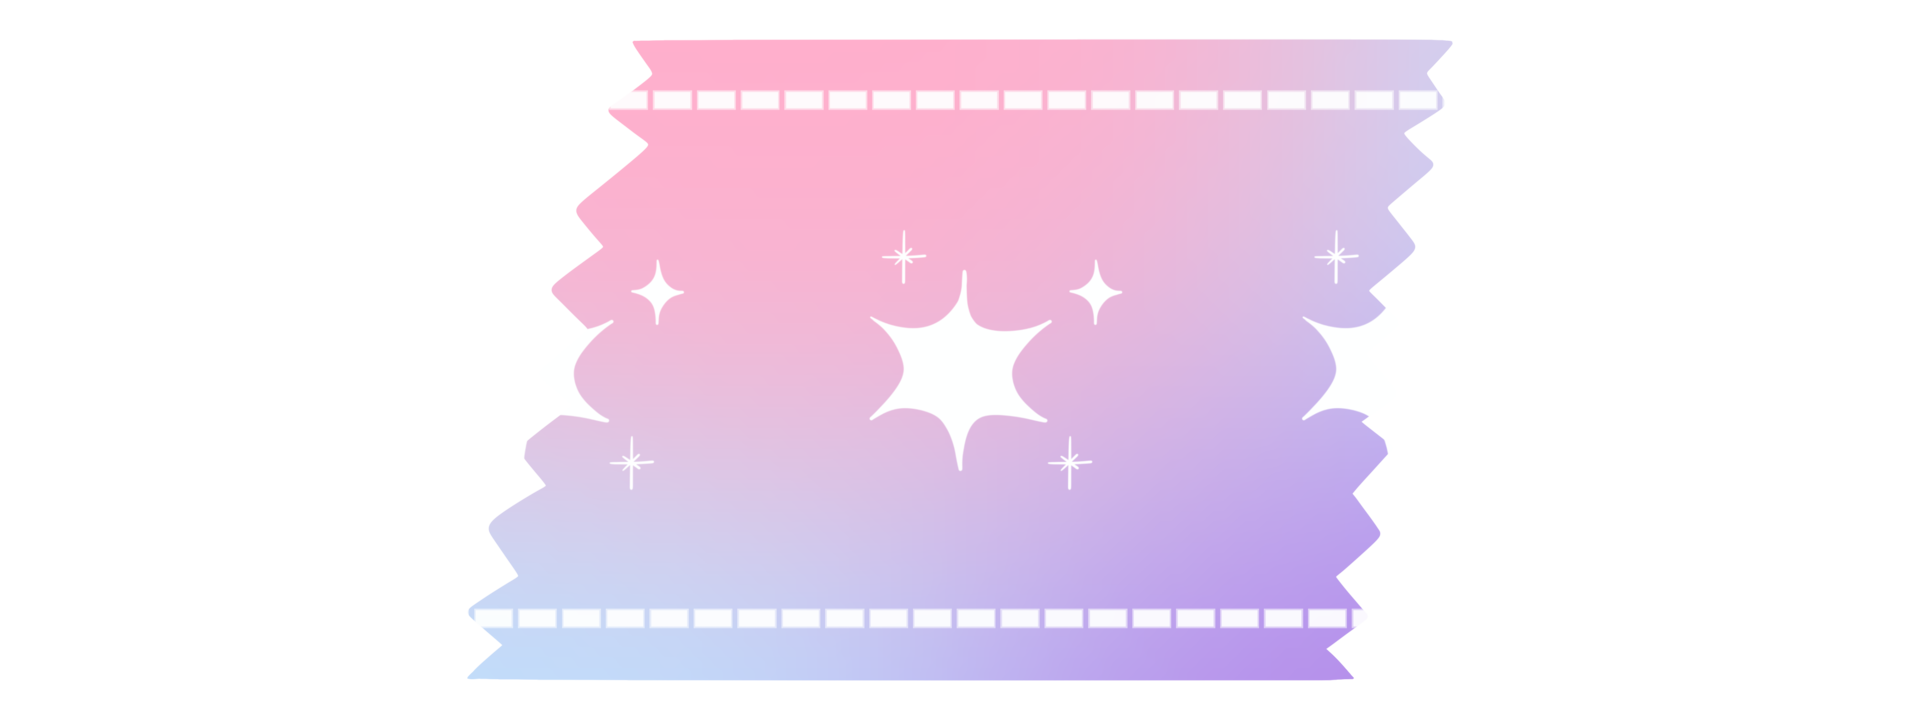 Gradient Washi Tape png